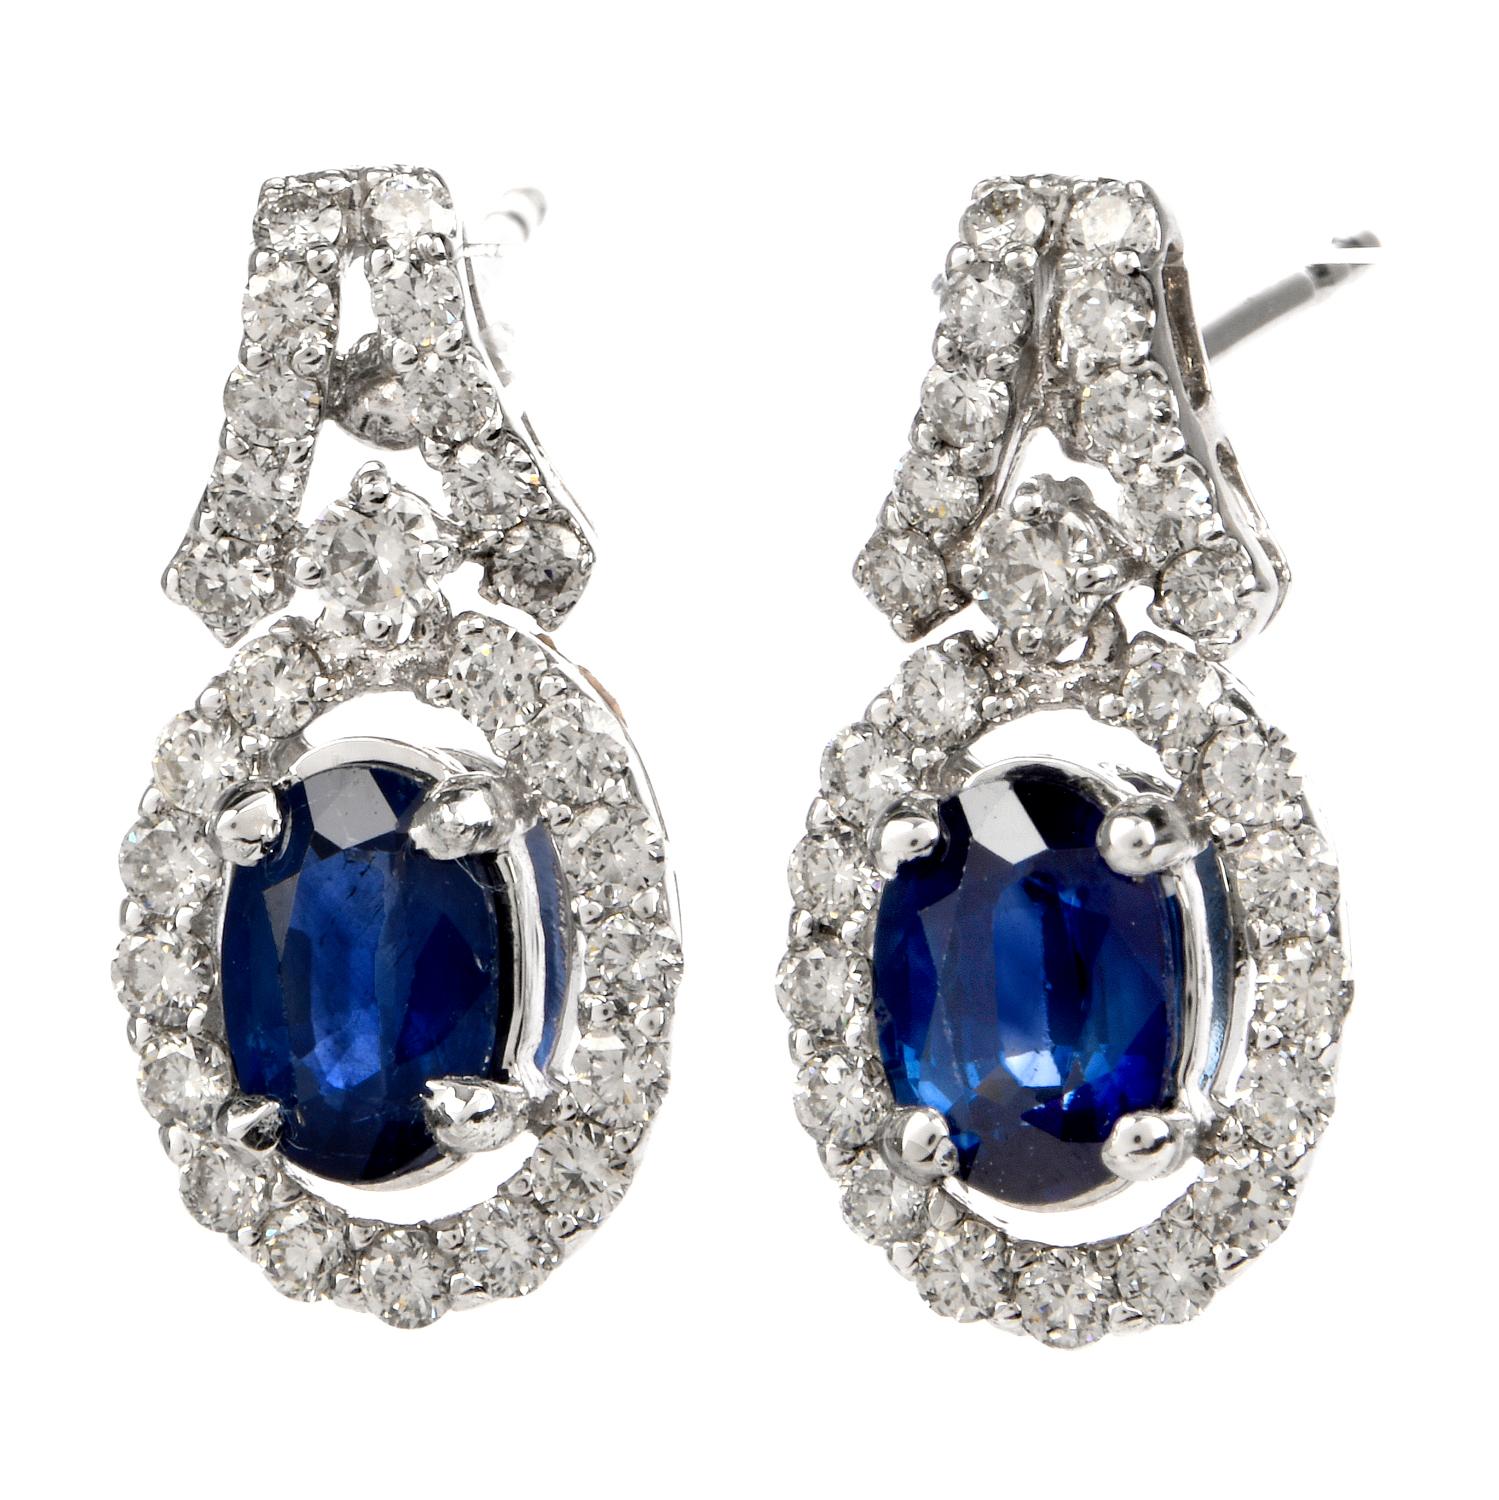 These shimmering diamond and blue sapphire drop earrings are crafted in 18-karat white gold, weighing 3.9 grams and measuring 17mm long x 9mm wide. Displaying a pair of prong-set oval shaped blue sapphires collectively weighing approximately, 0.95